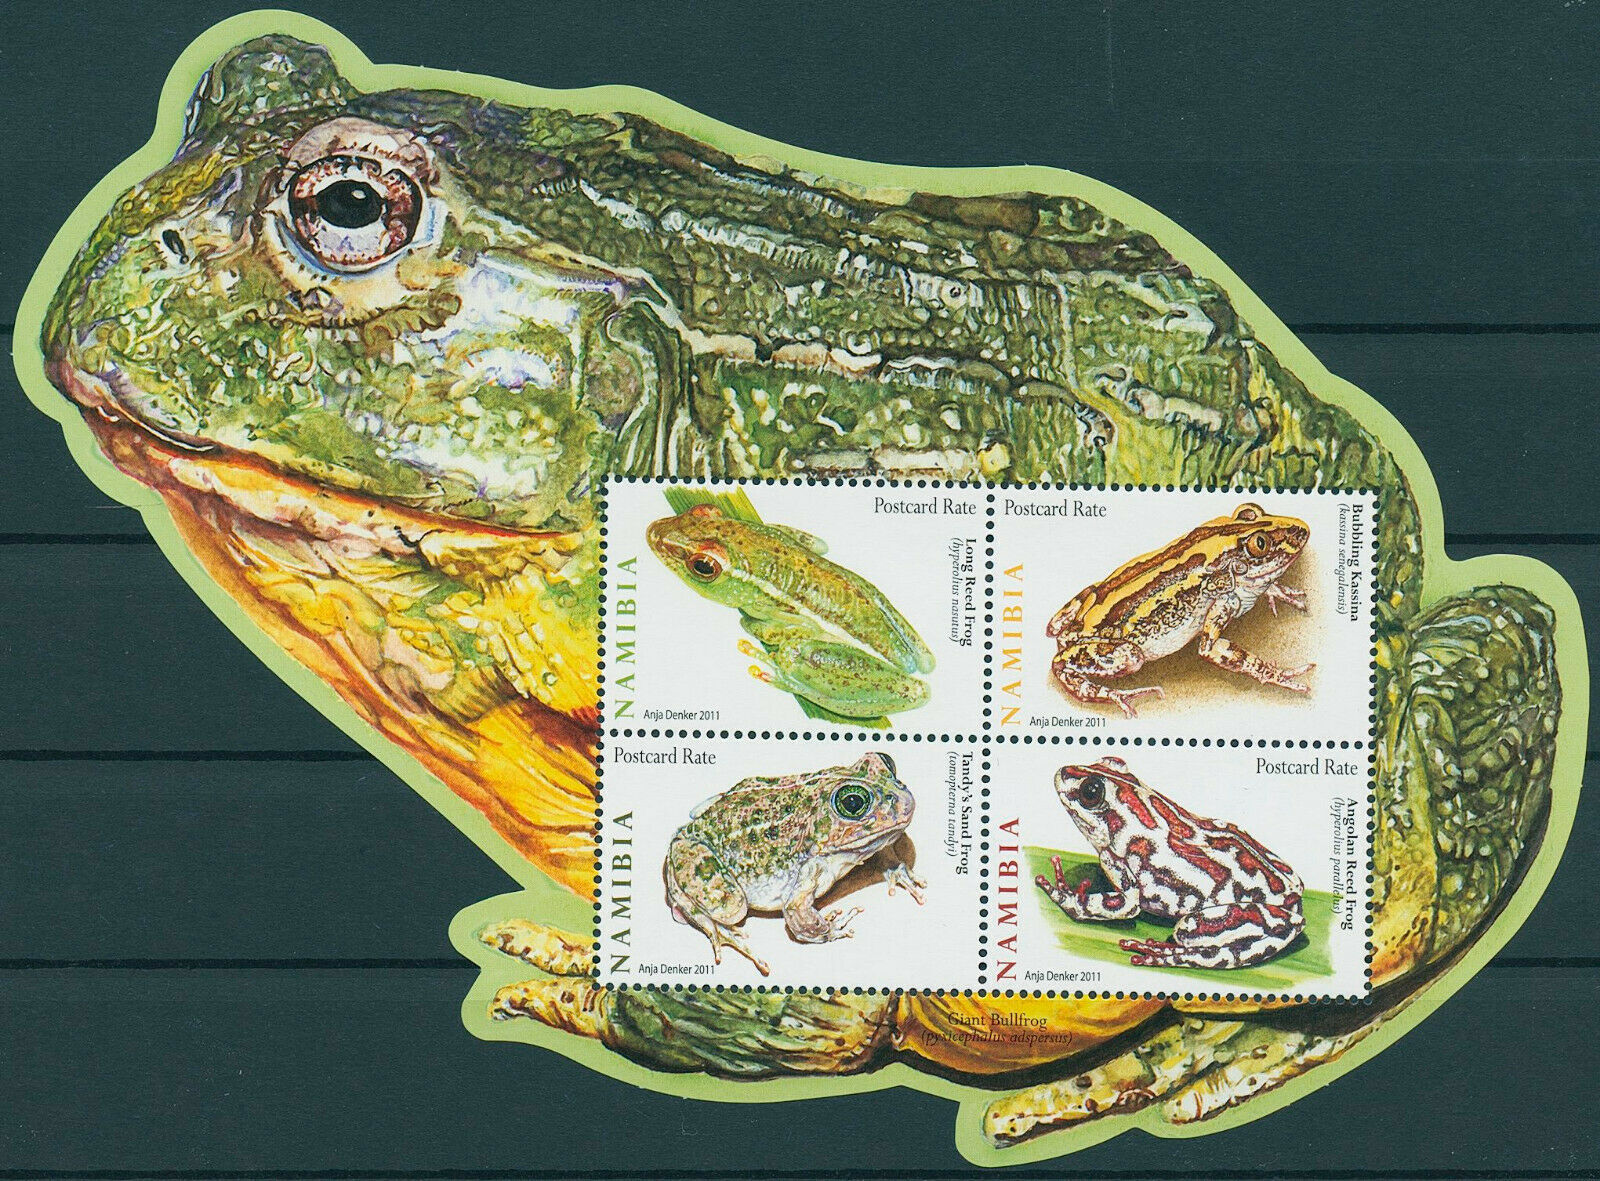 Namibia 2011 MNH Amphibians Stamps Frogs Long Reed Frog Bubbling Kassina 4v M/S